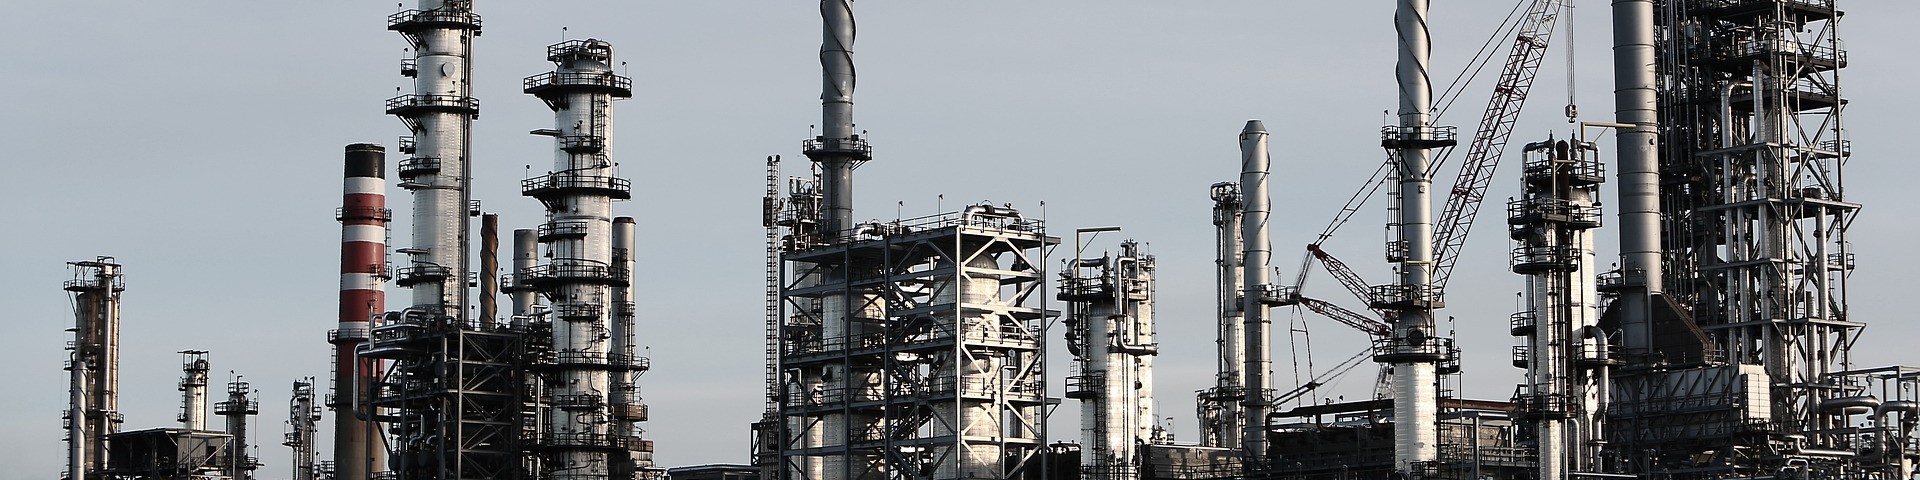 Chemical industrial plants